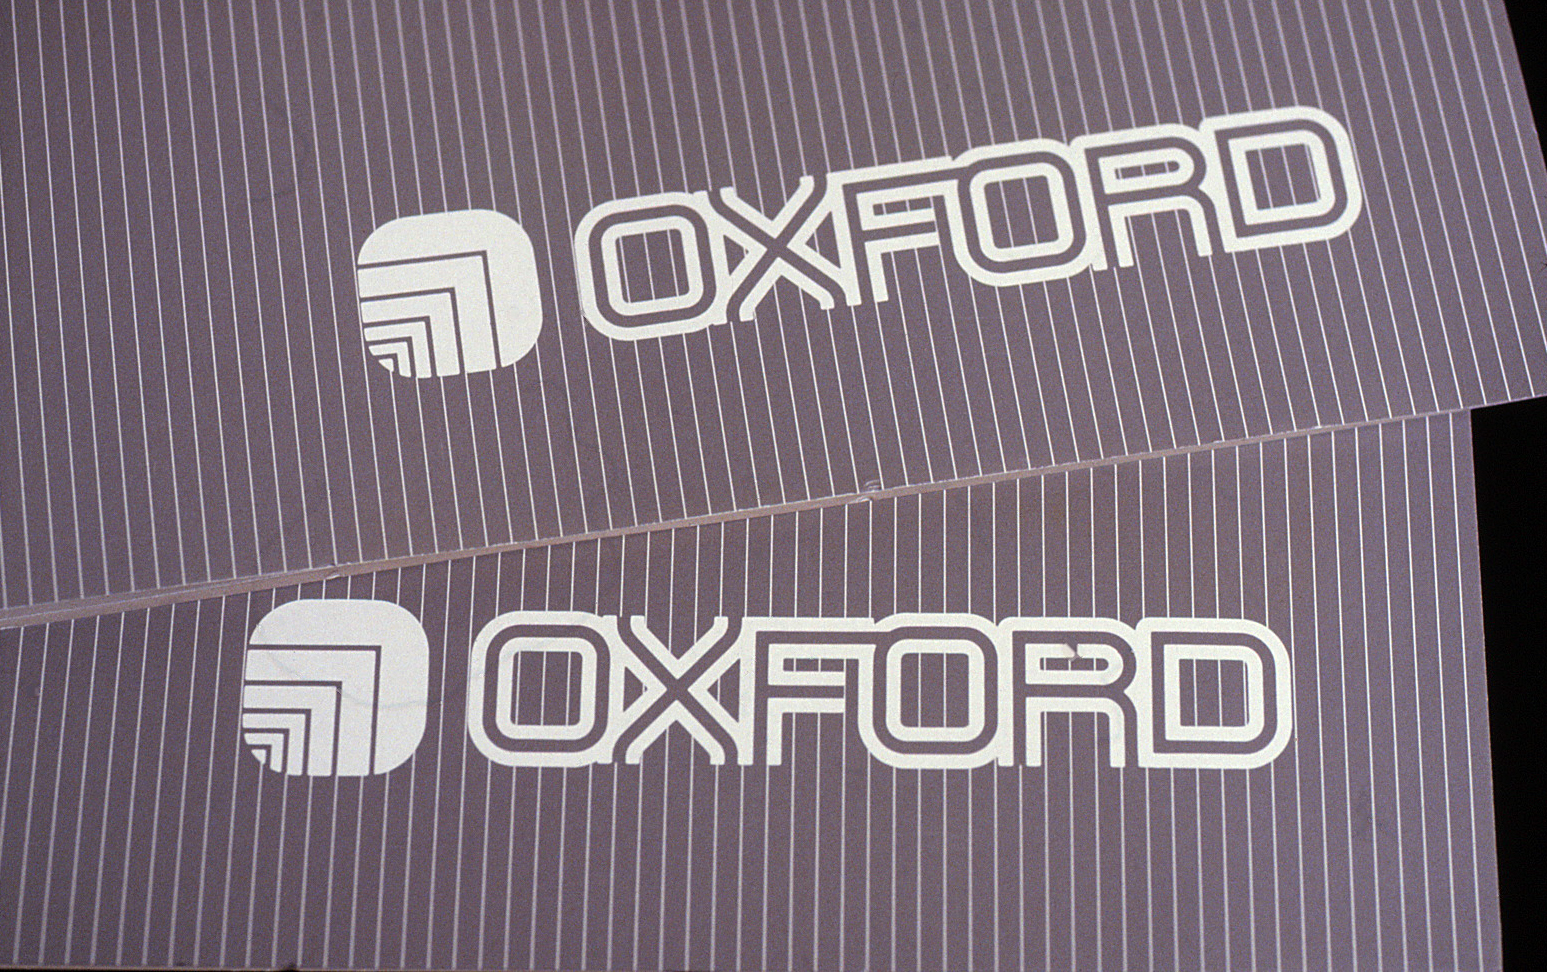 Detail of the brochure covers featuring the Oxford logo and typeface.